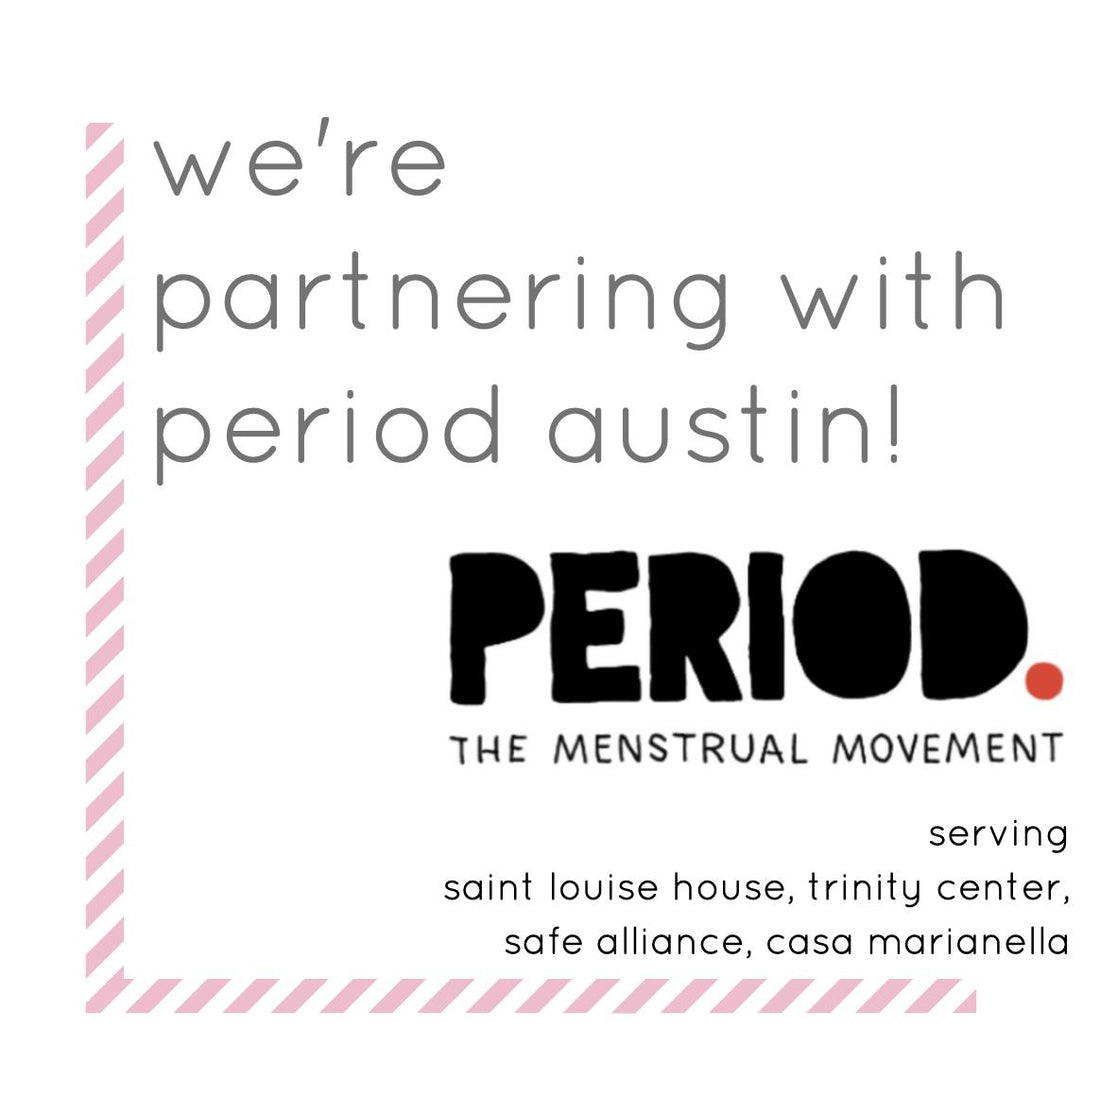 A New Partnership with Period Austin!